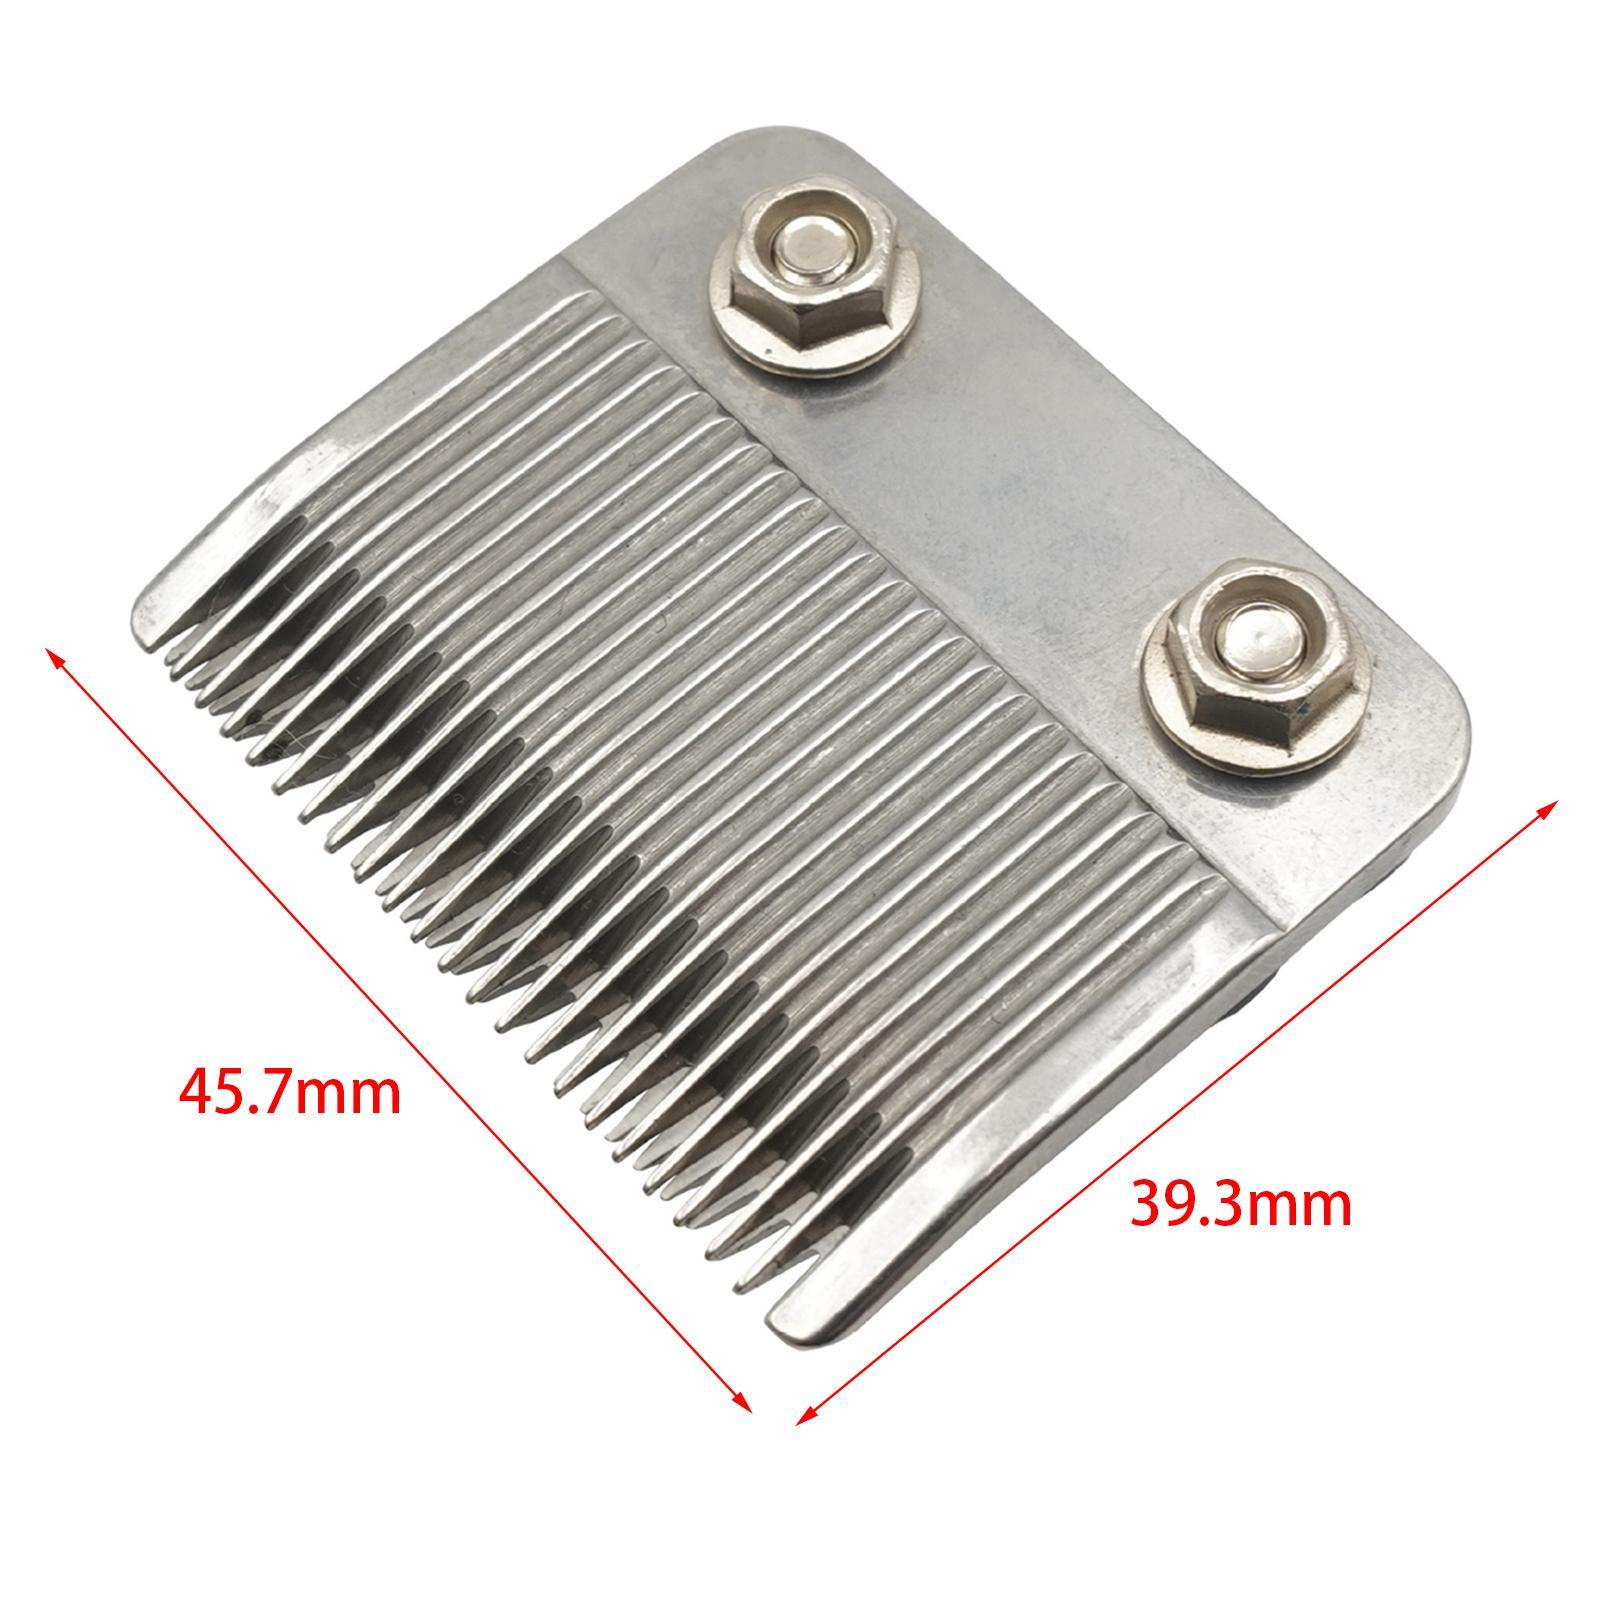 Sewing Machine Blade Thread Cutting Machine Accessories for Household Mother